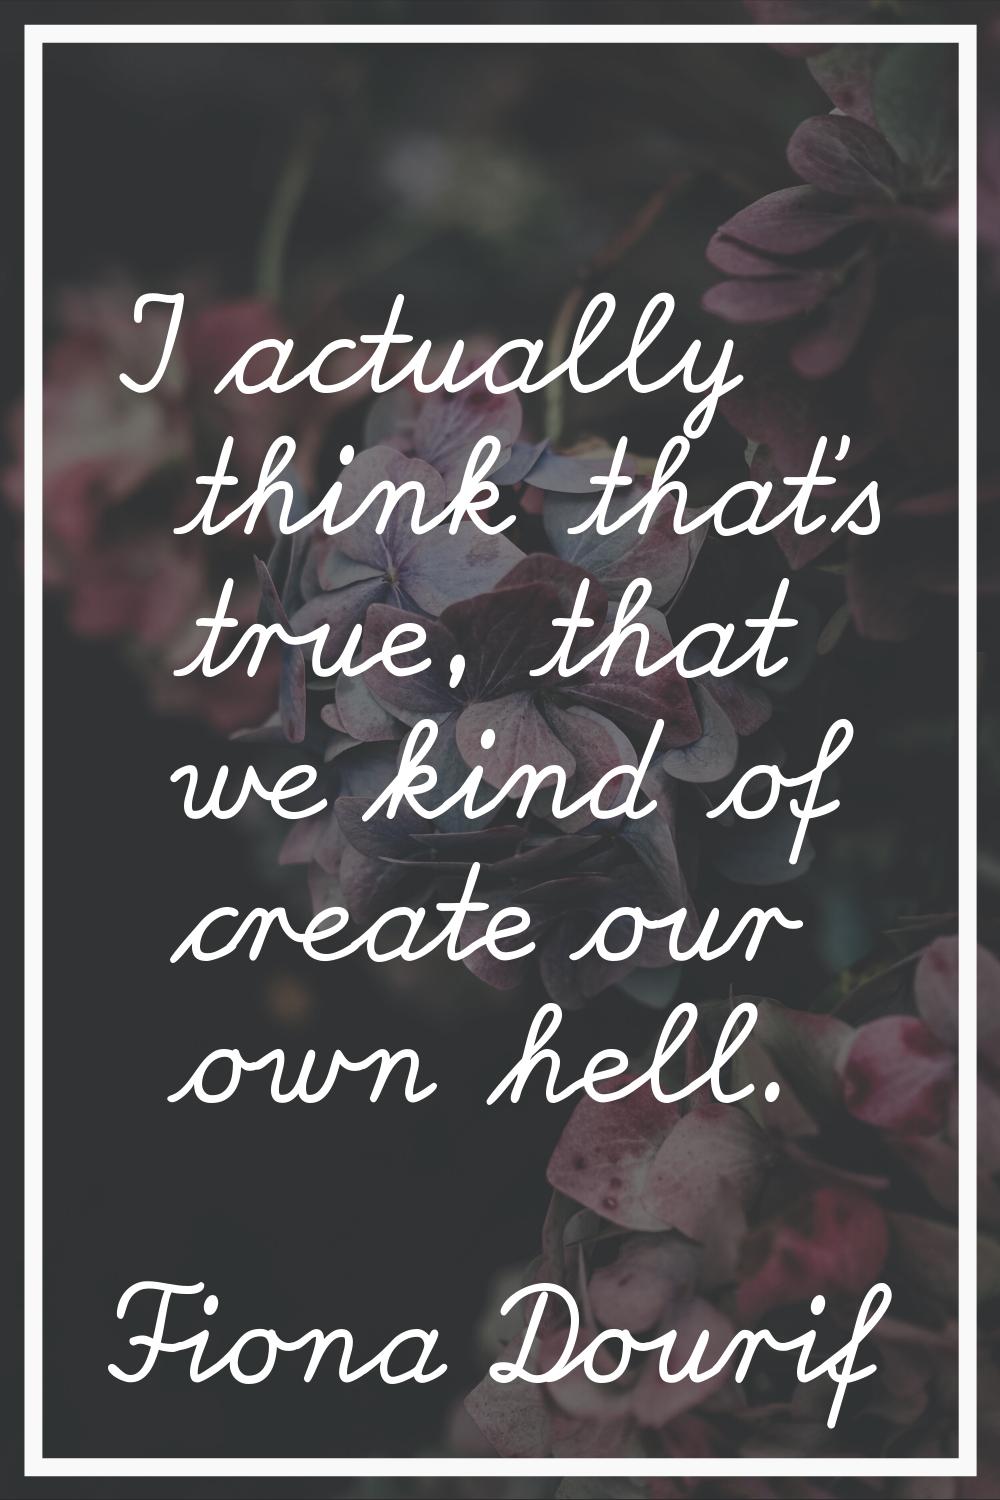 I actually think that's true, that we kind of create our own hell.